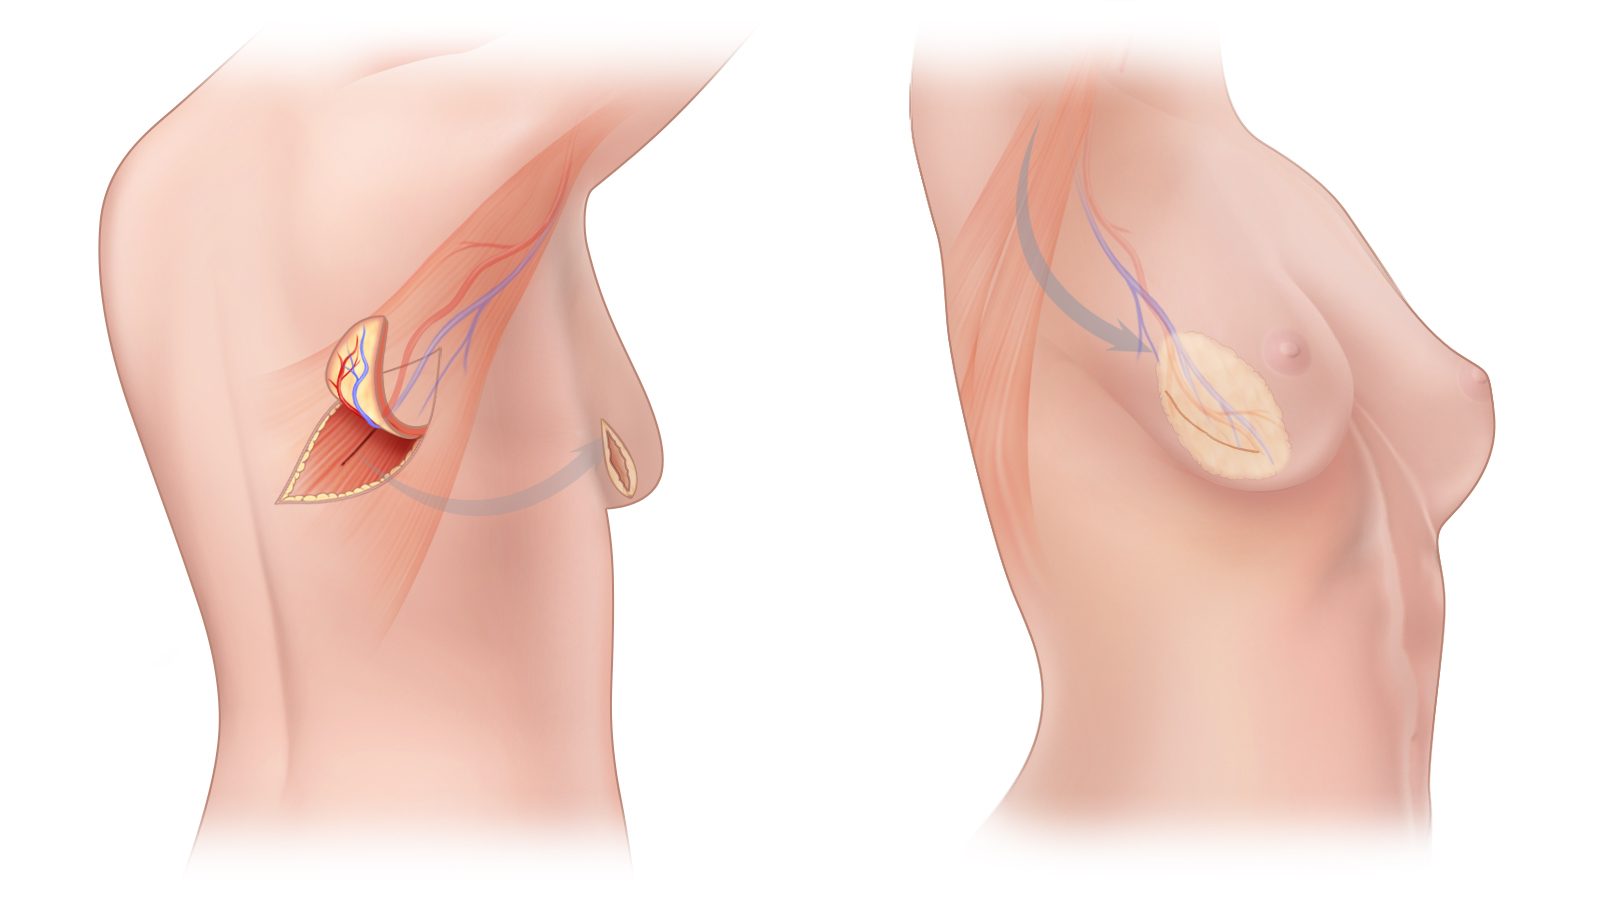 Body Lift Breast Reconstruction with “Extended DIEP Flaps”